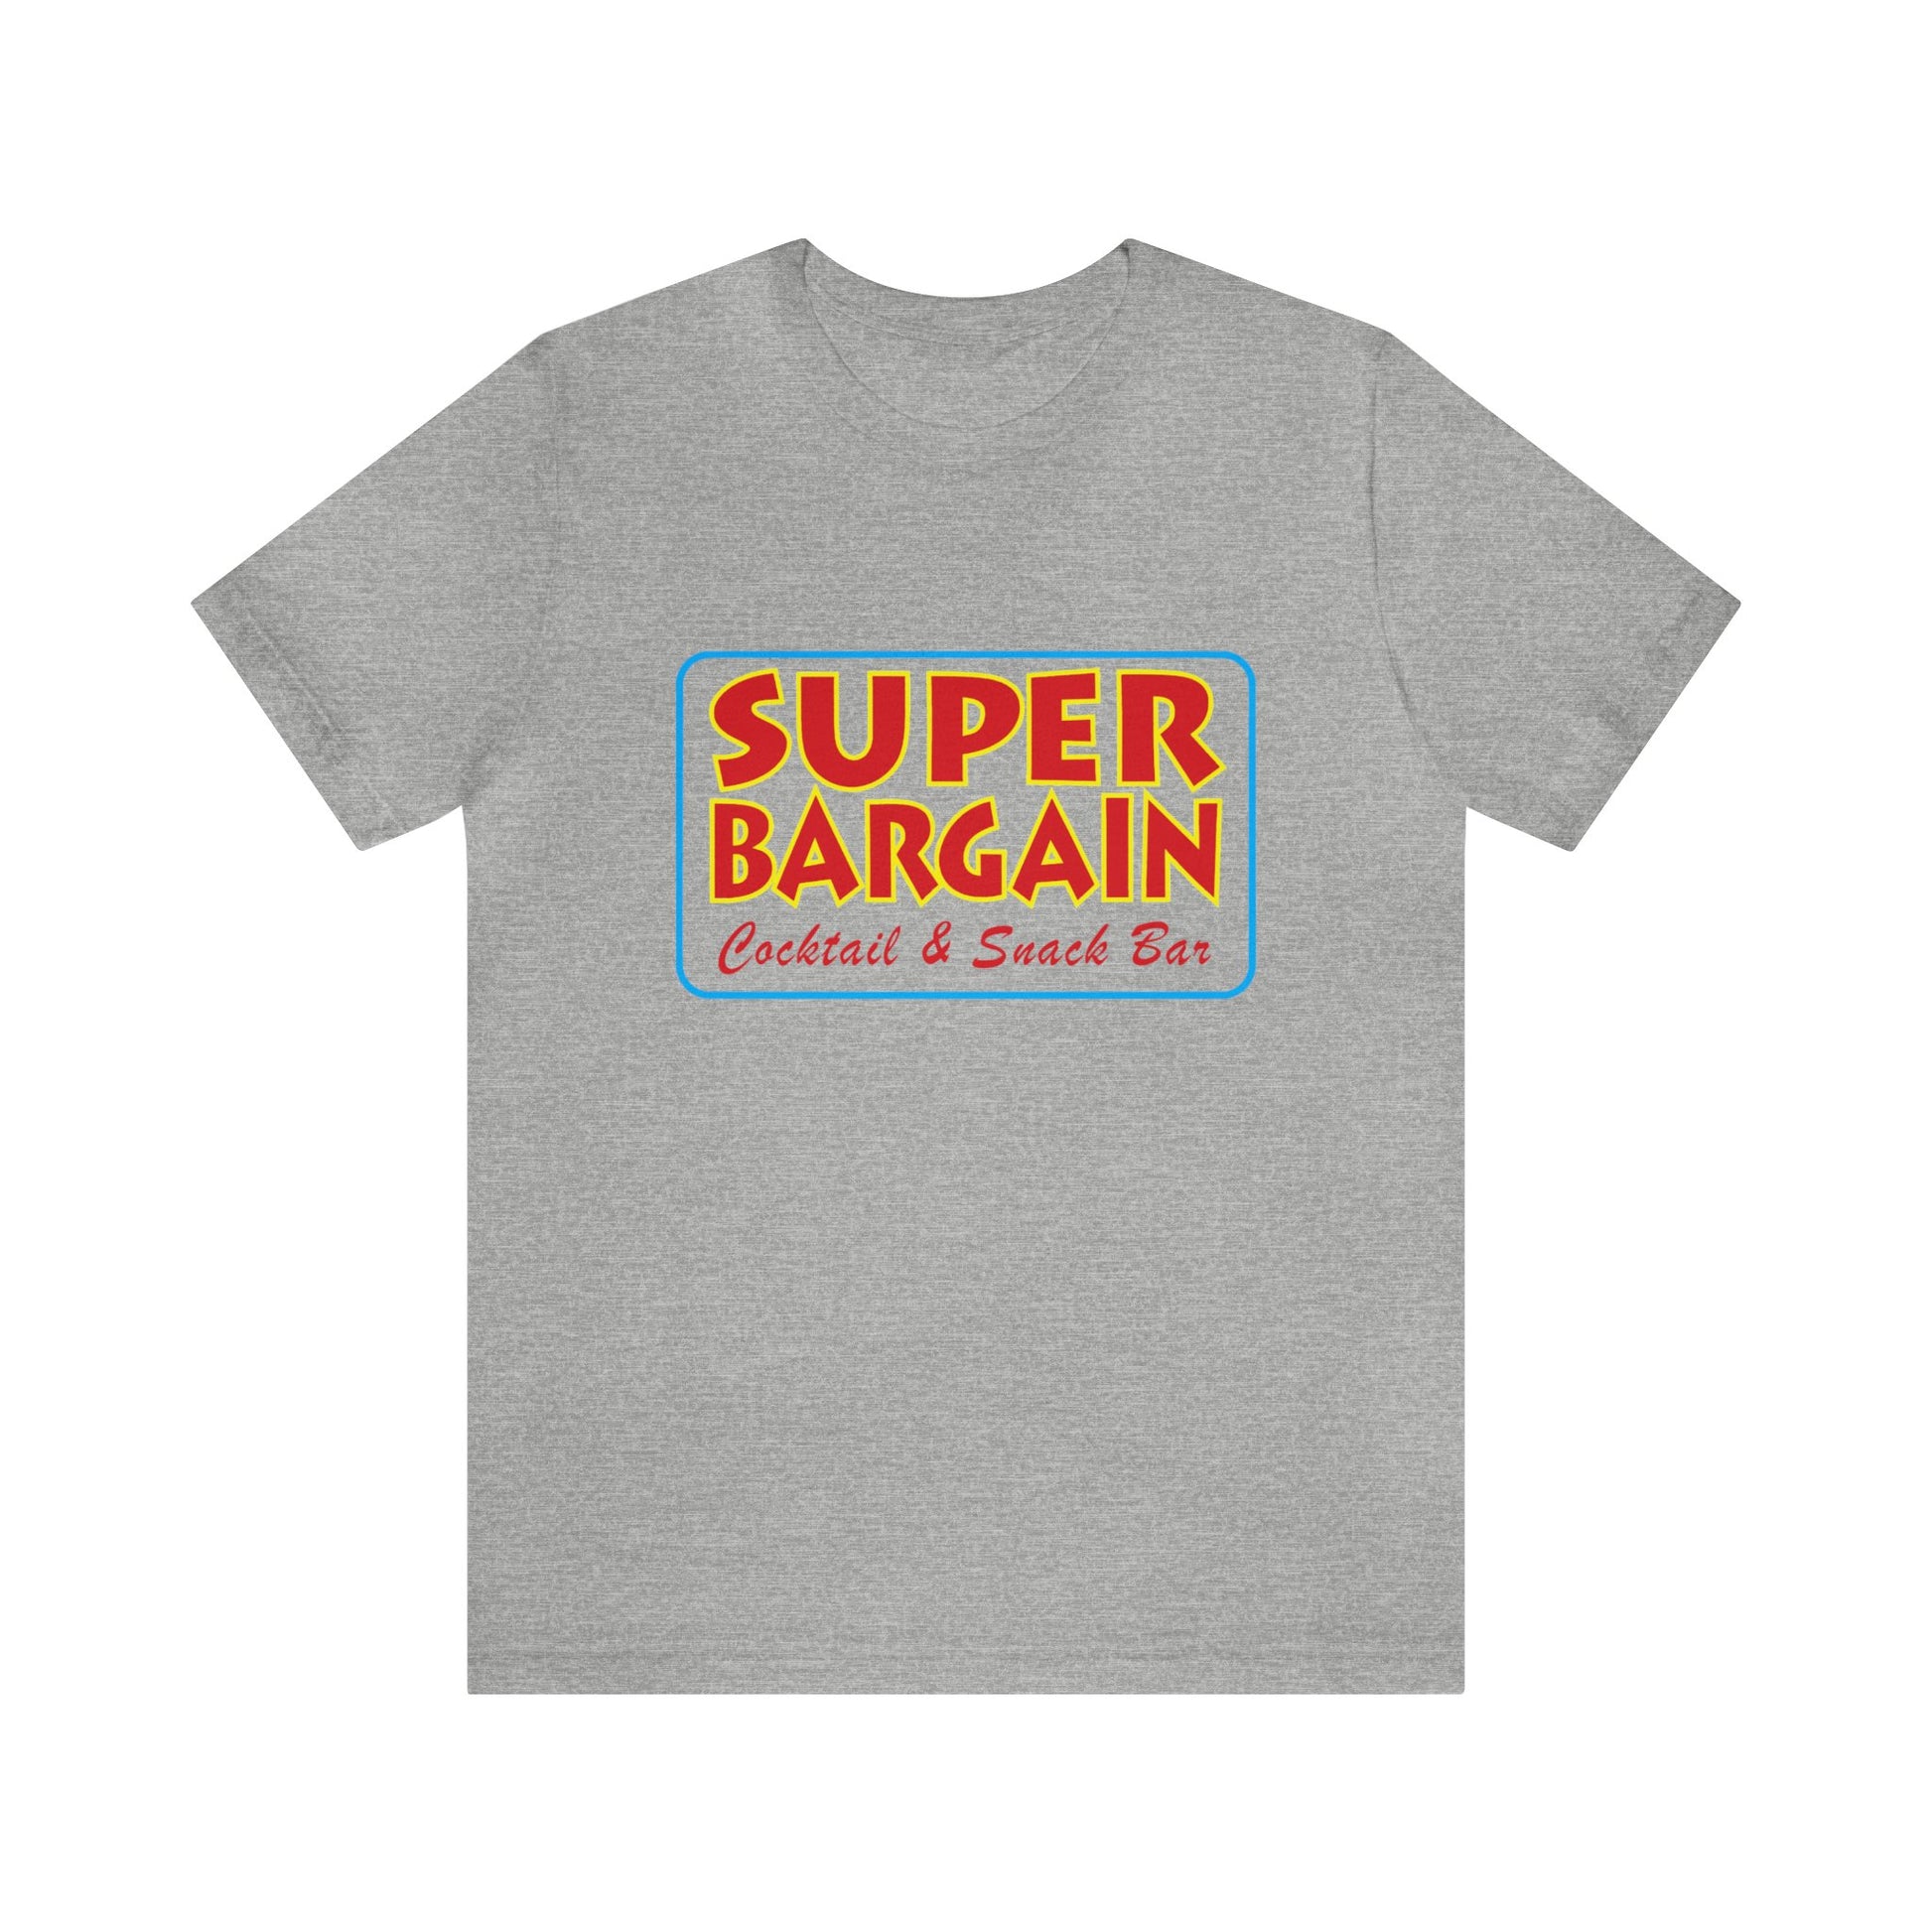 A gray Unisex Jersey Short Sleeve Tee with a colorful logo that reads "SUPER BARGAIN Cocktail & Snack Bar - Cabbagetown, Toronto" in yellow and red letters on a blue and orange background by Printify.